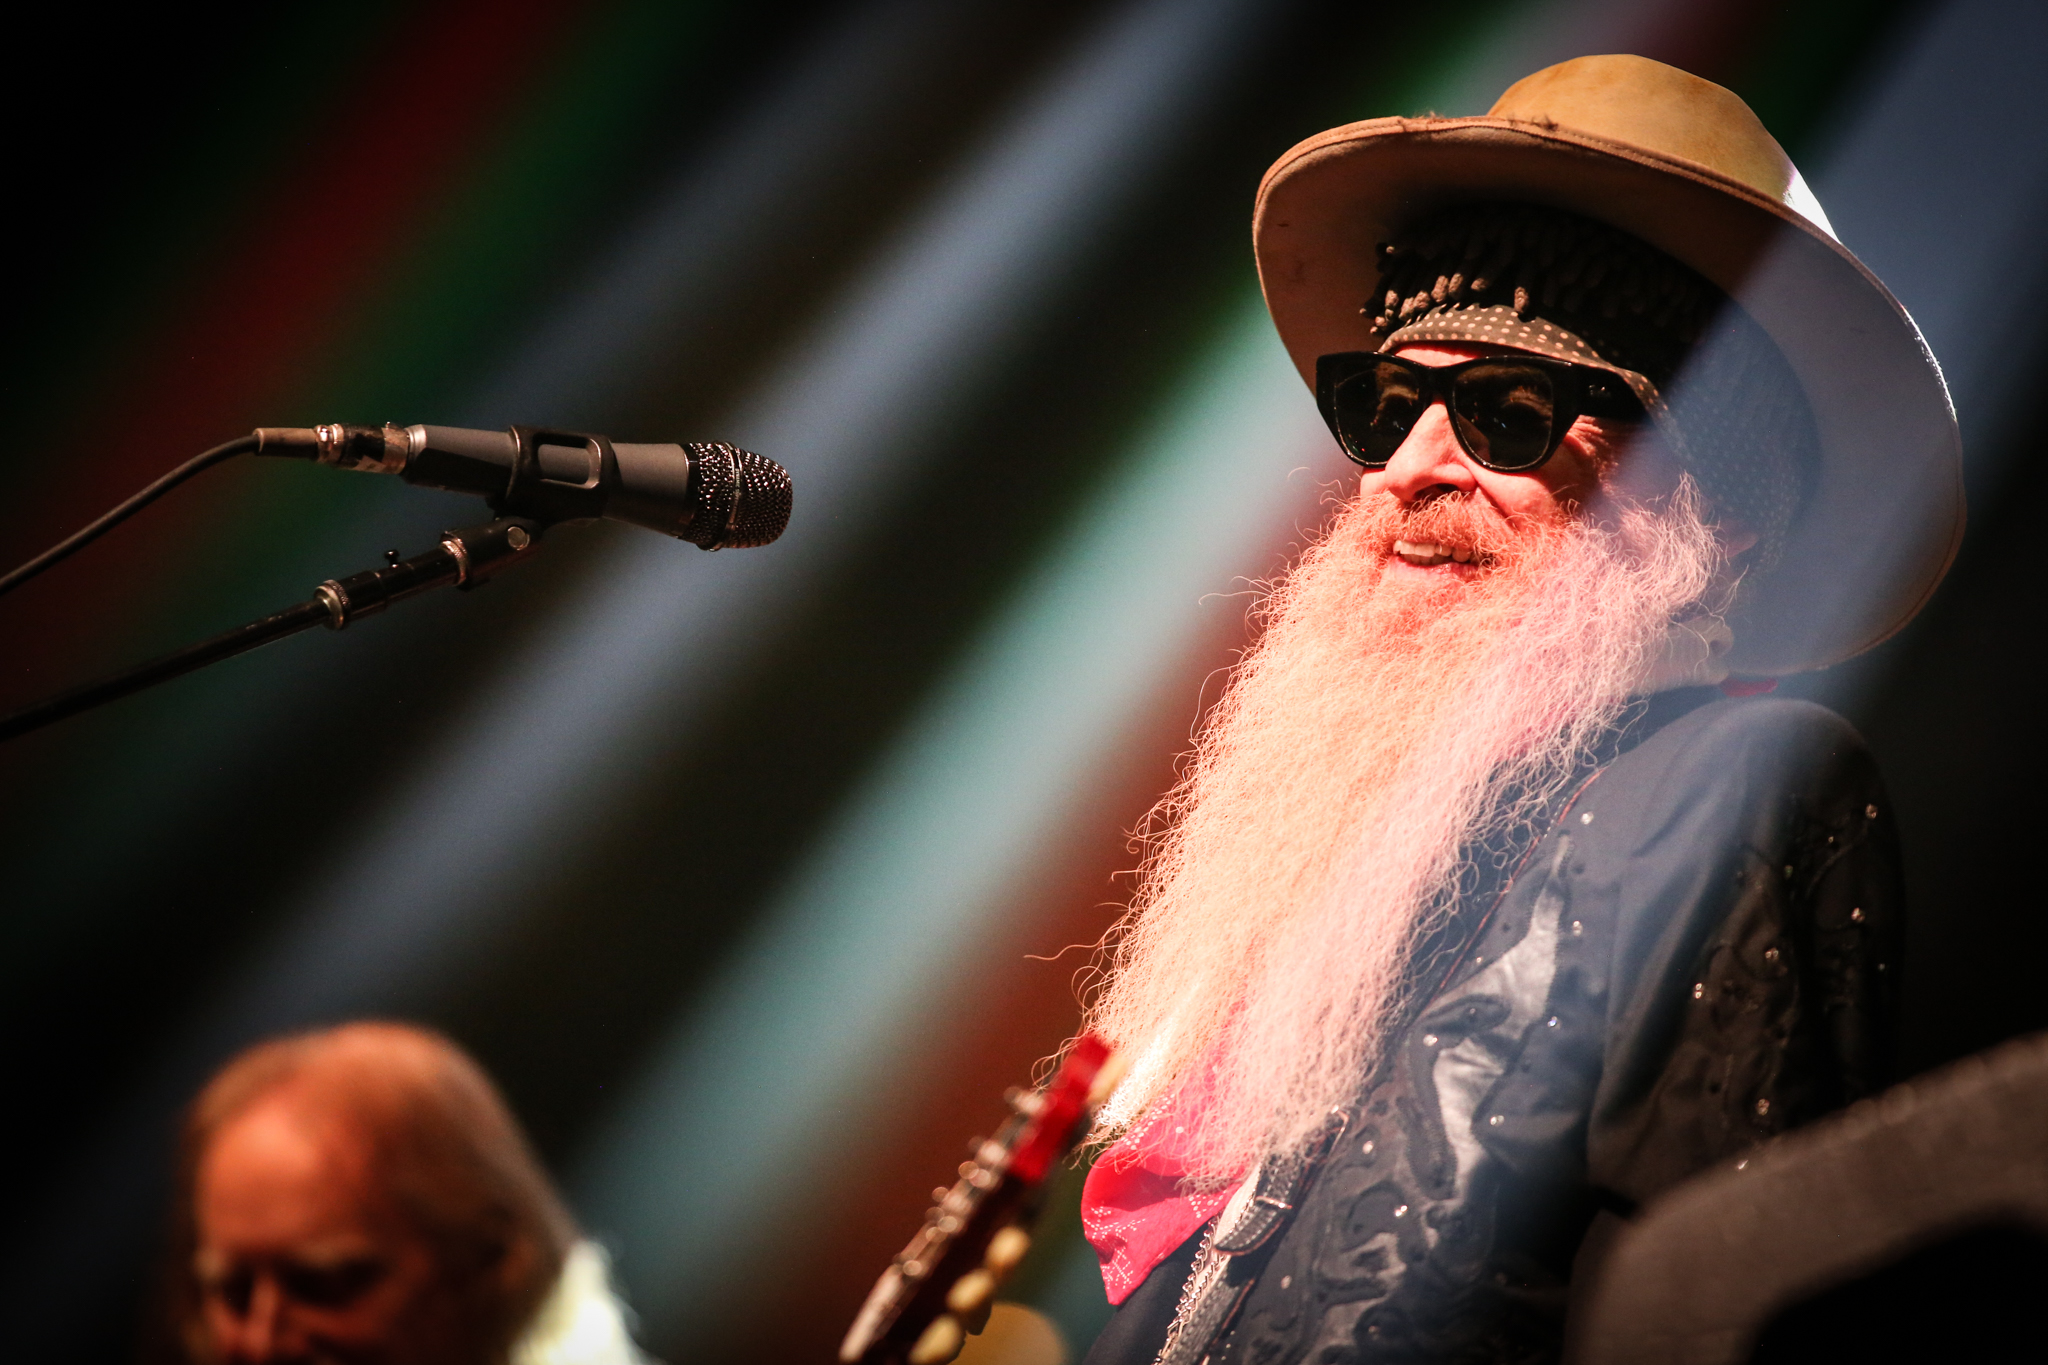 Billy Gibbons of ZZ Top plays a great show in Asheville.  